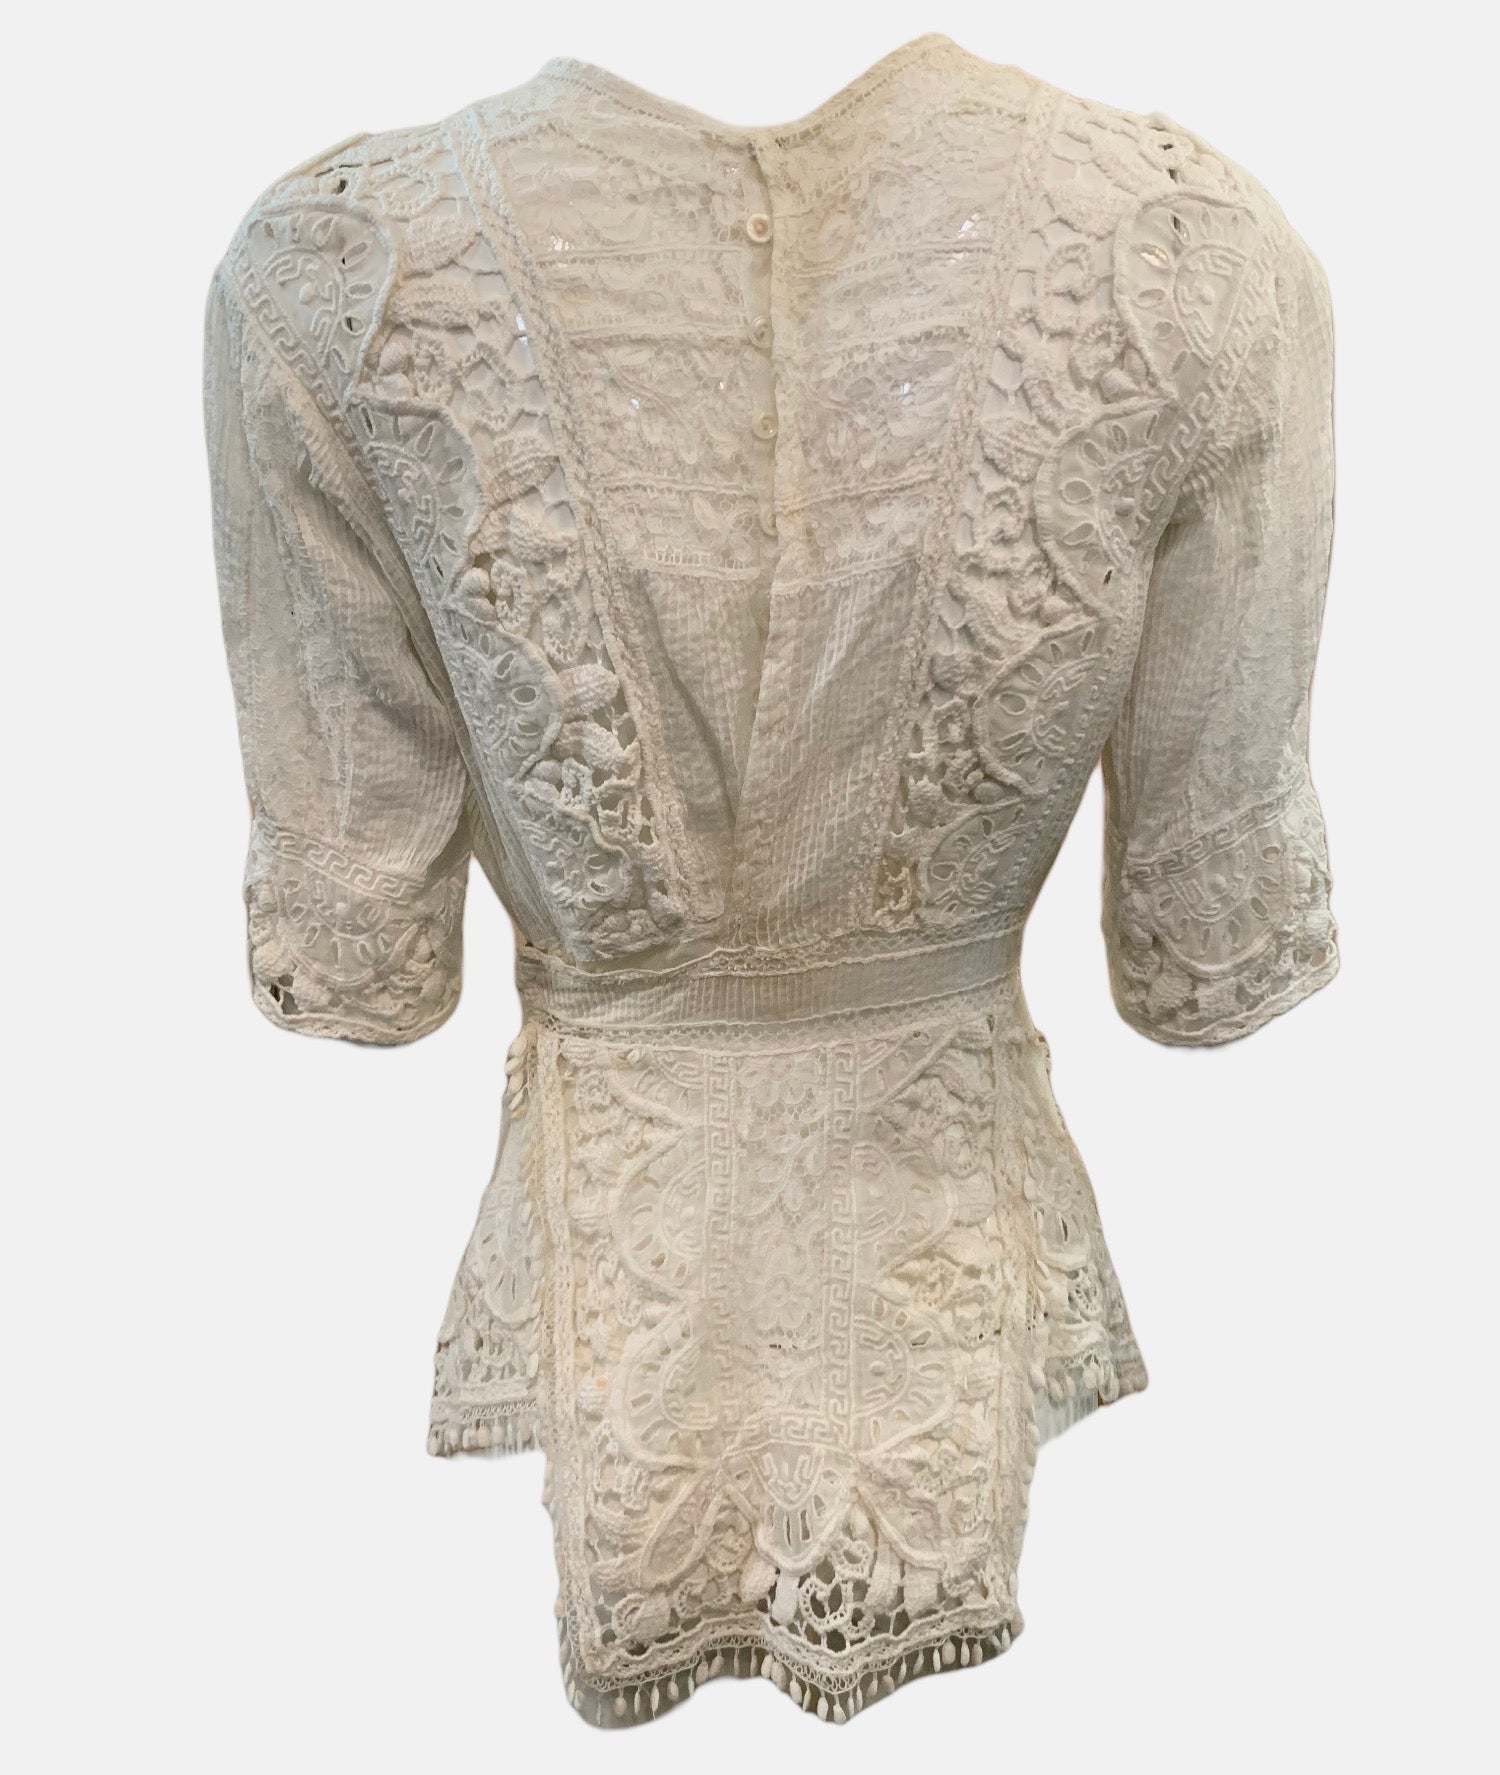  Incredible Edwardian White Blouse with Intricate Hand Done Embroidery and Lace BACK 3 of 6